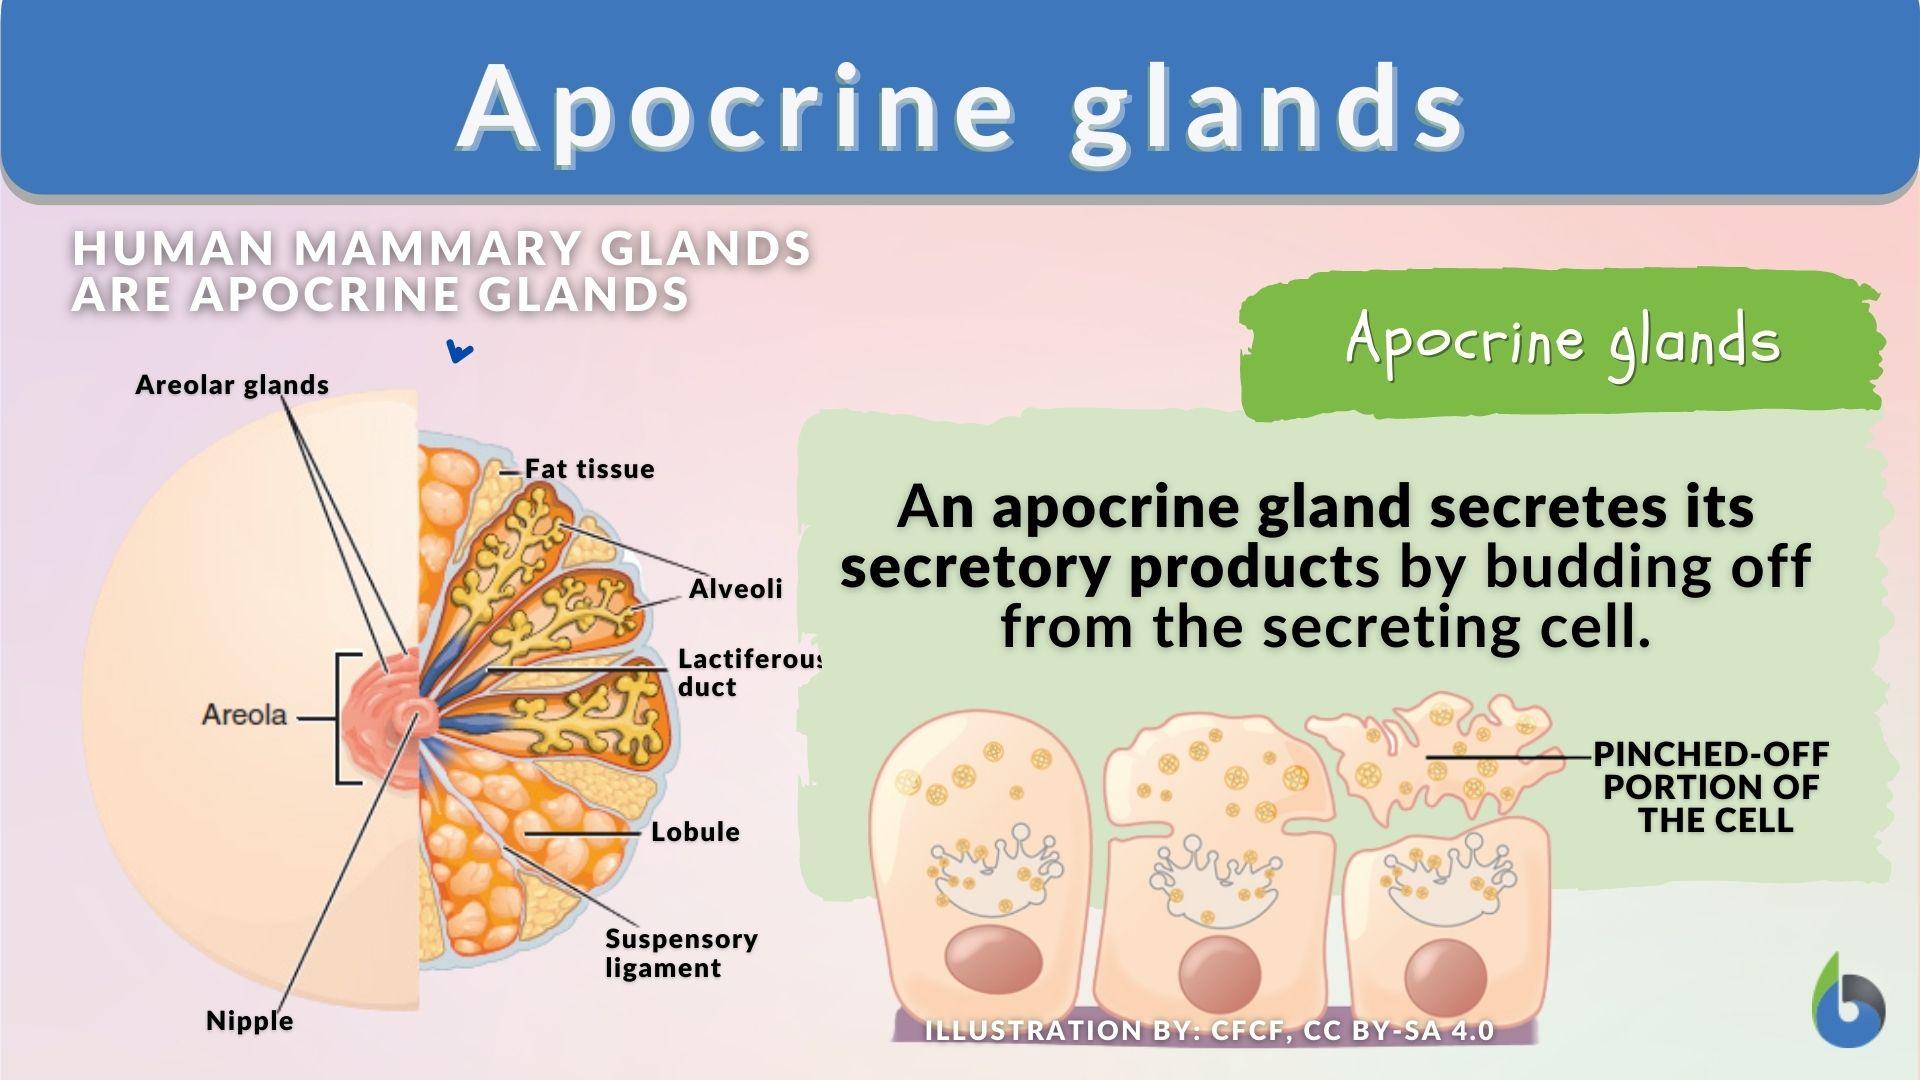 Apocrine gland - Definition and Examples - Biology Online Dictionary